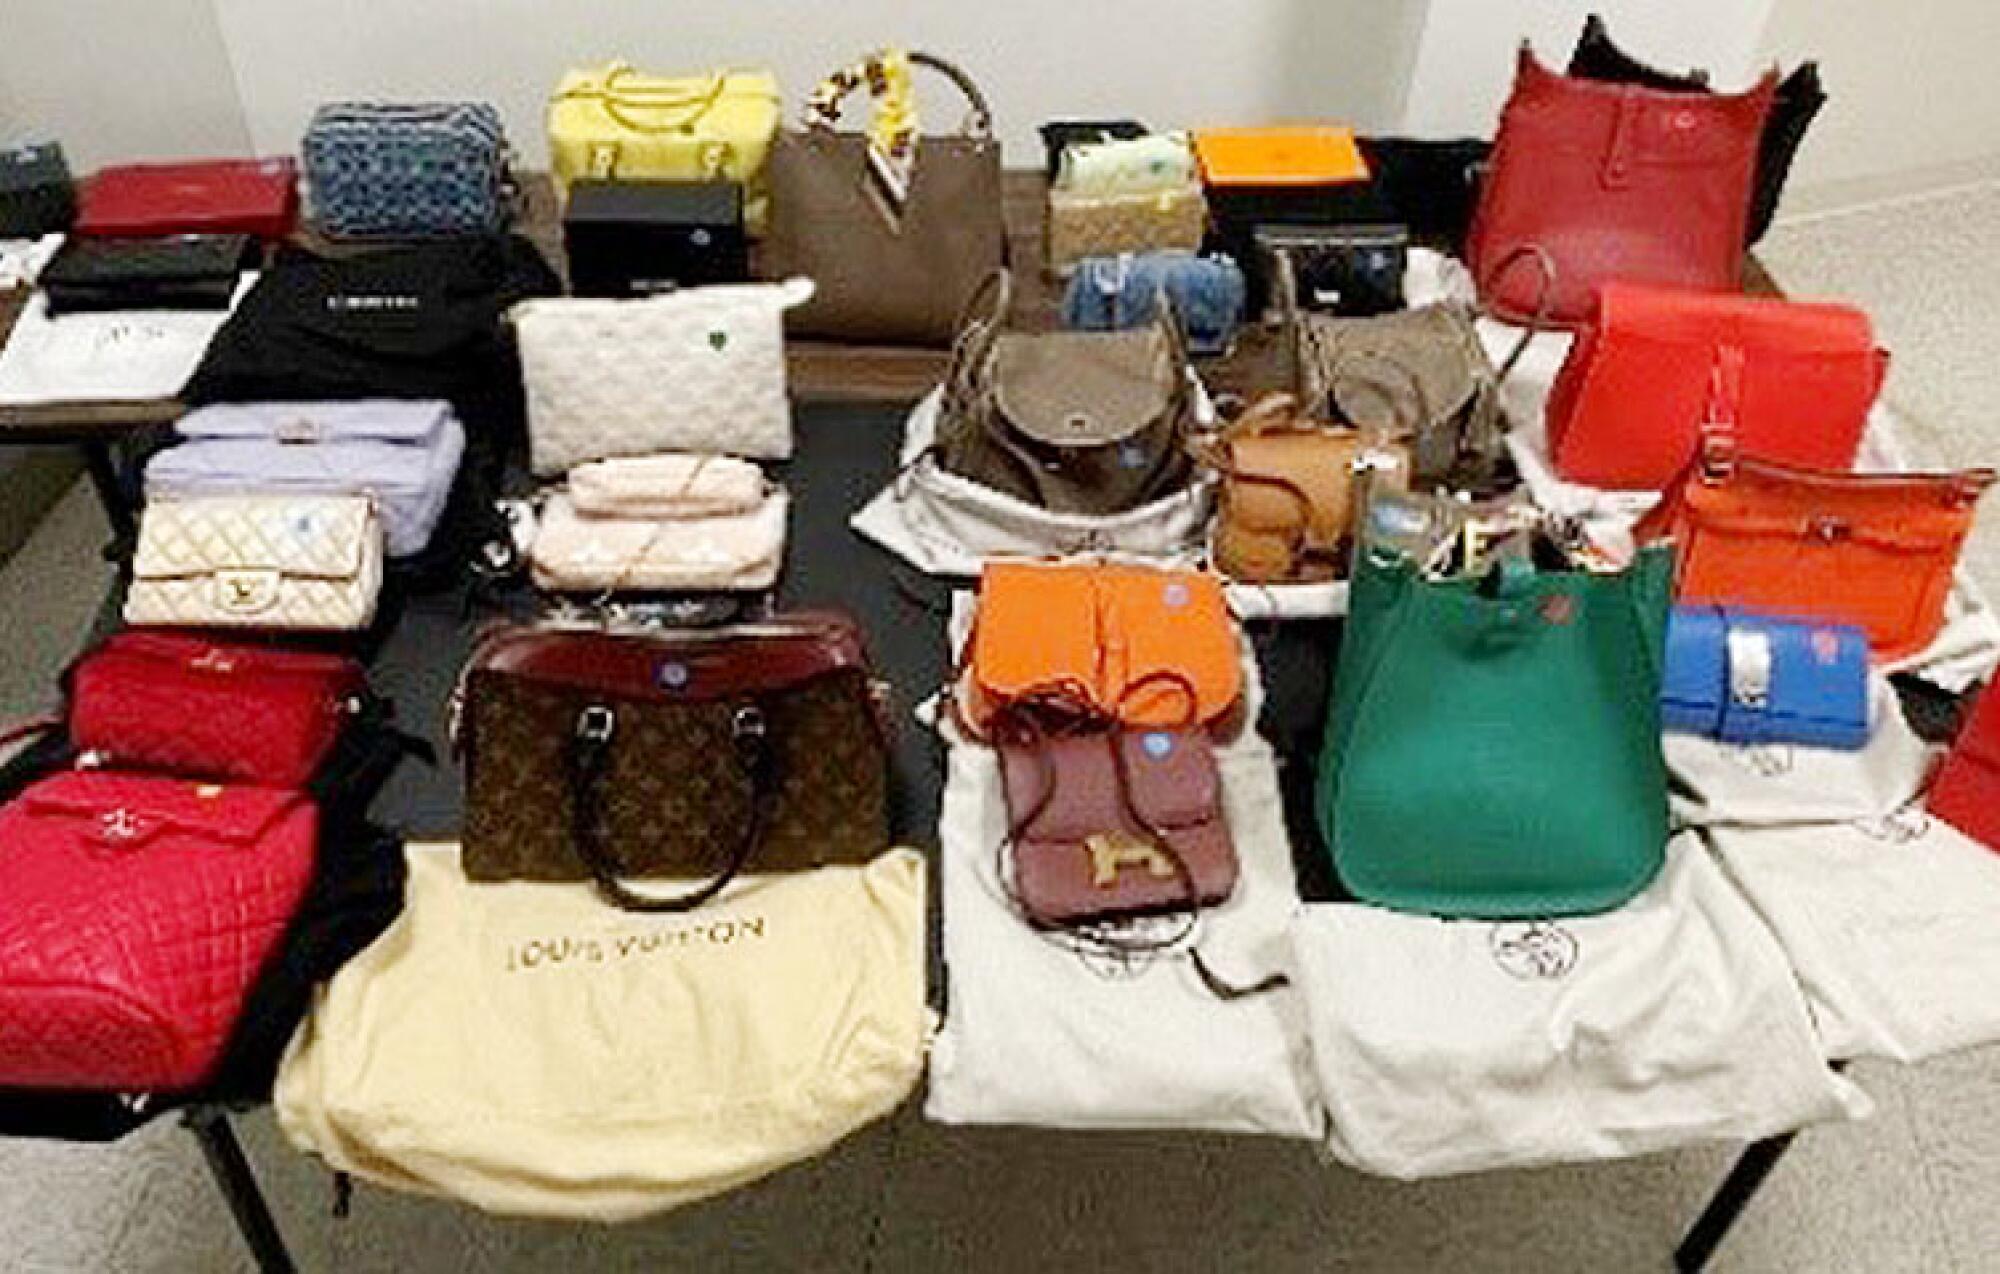 More than two dozen purses of various sizes and colors arranged in rows on a table, some with dust bags from high-end brands